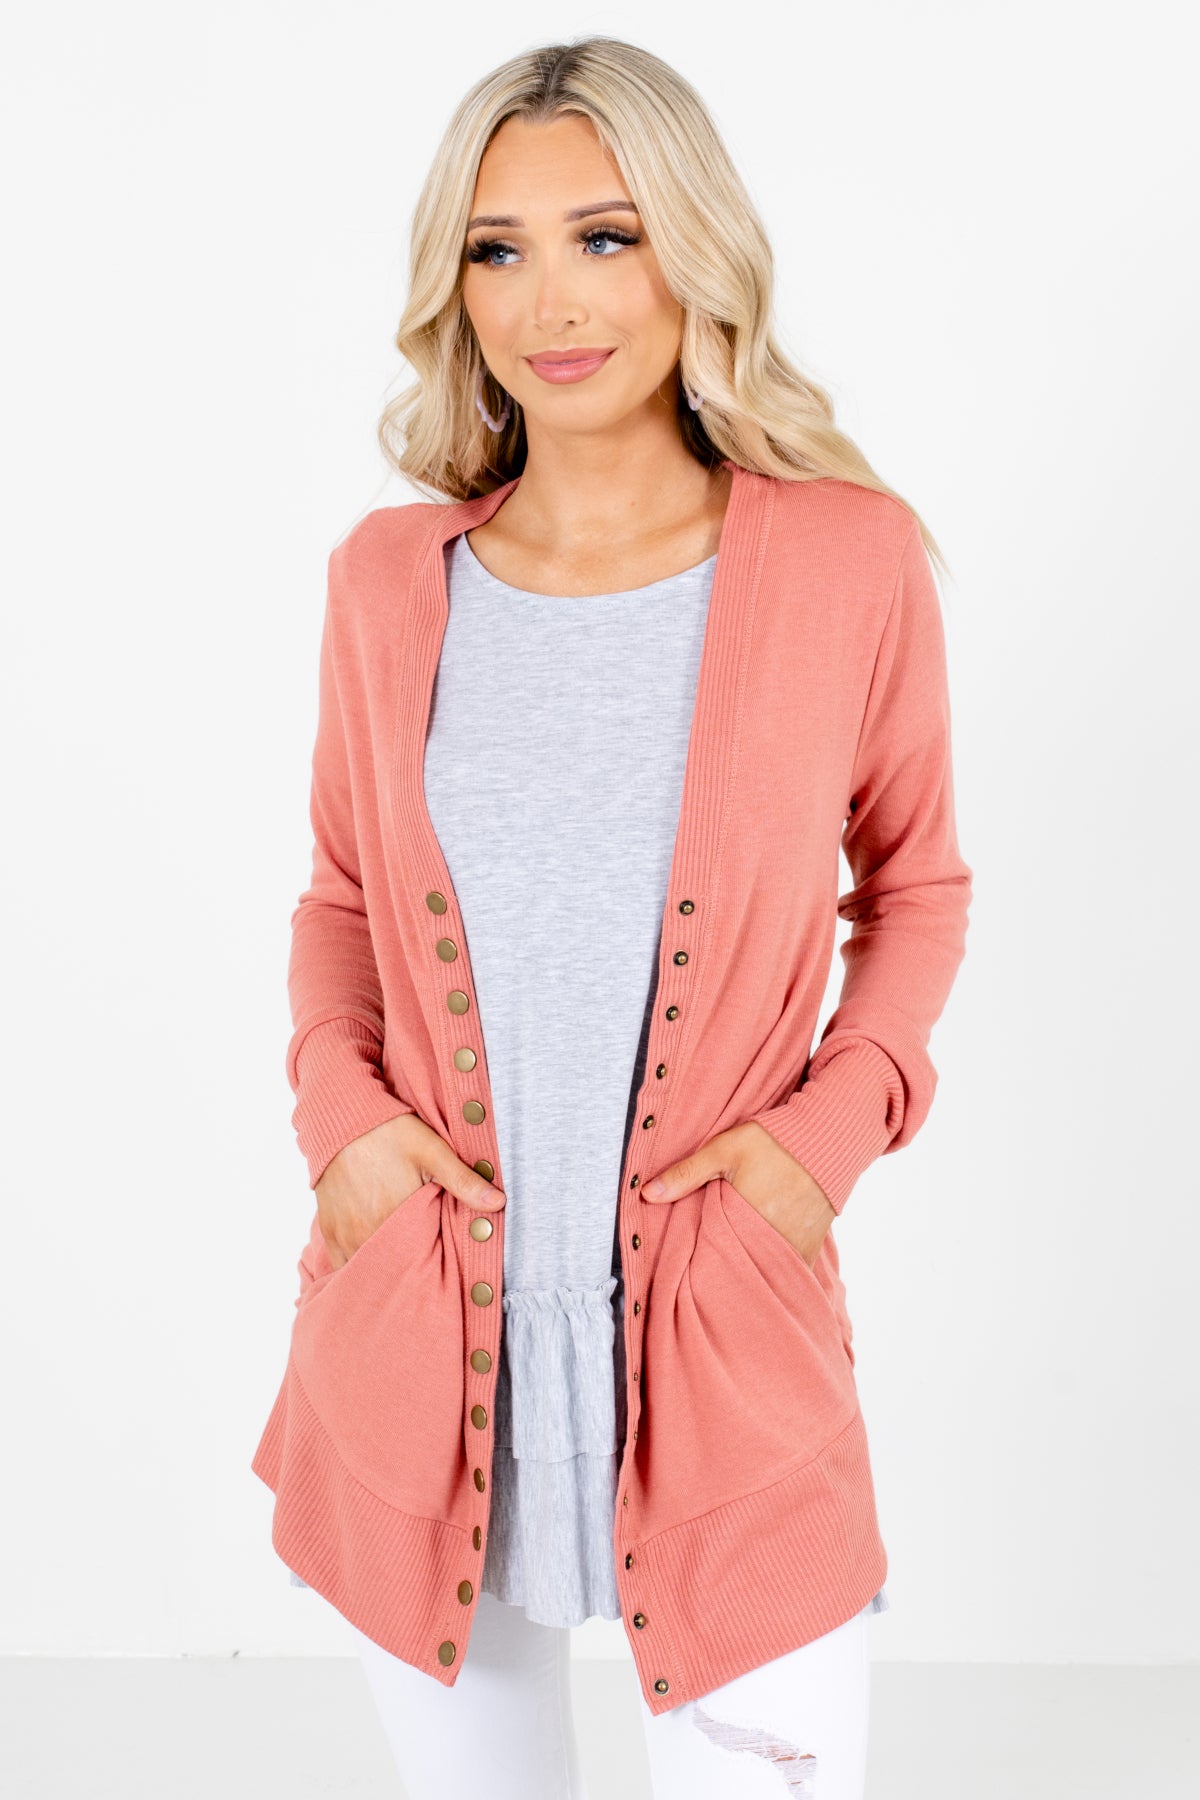 Ash Pink Cardigan with Buttons